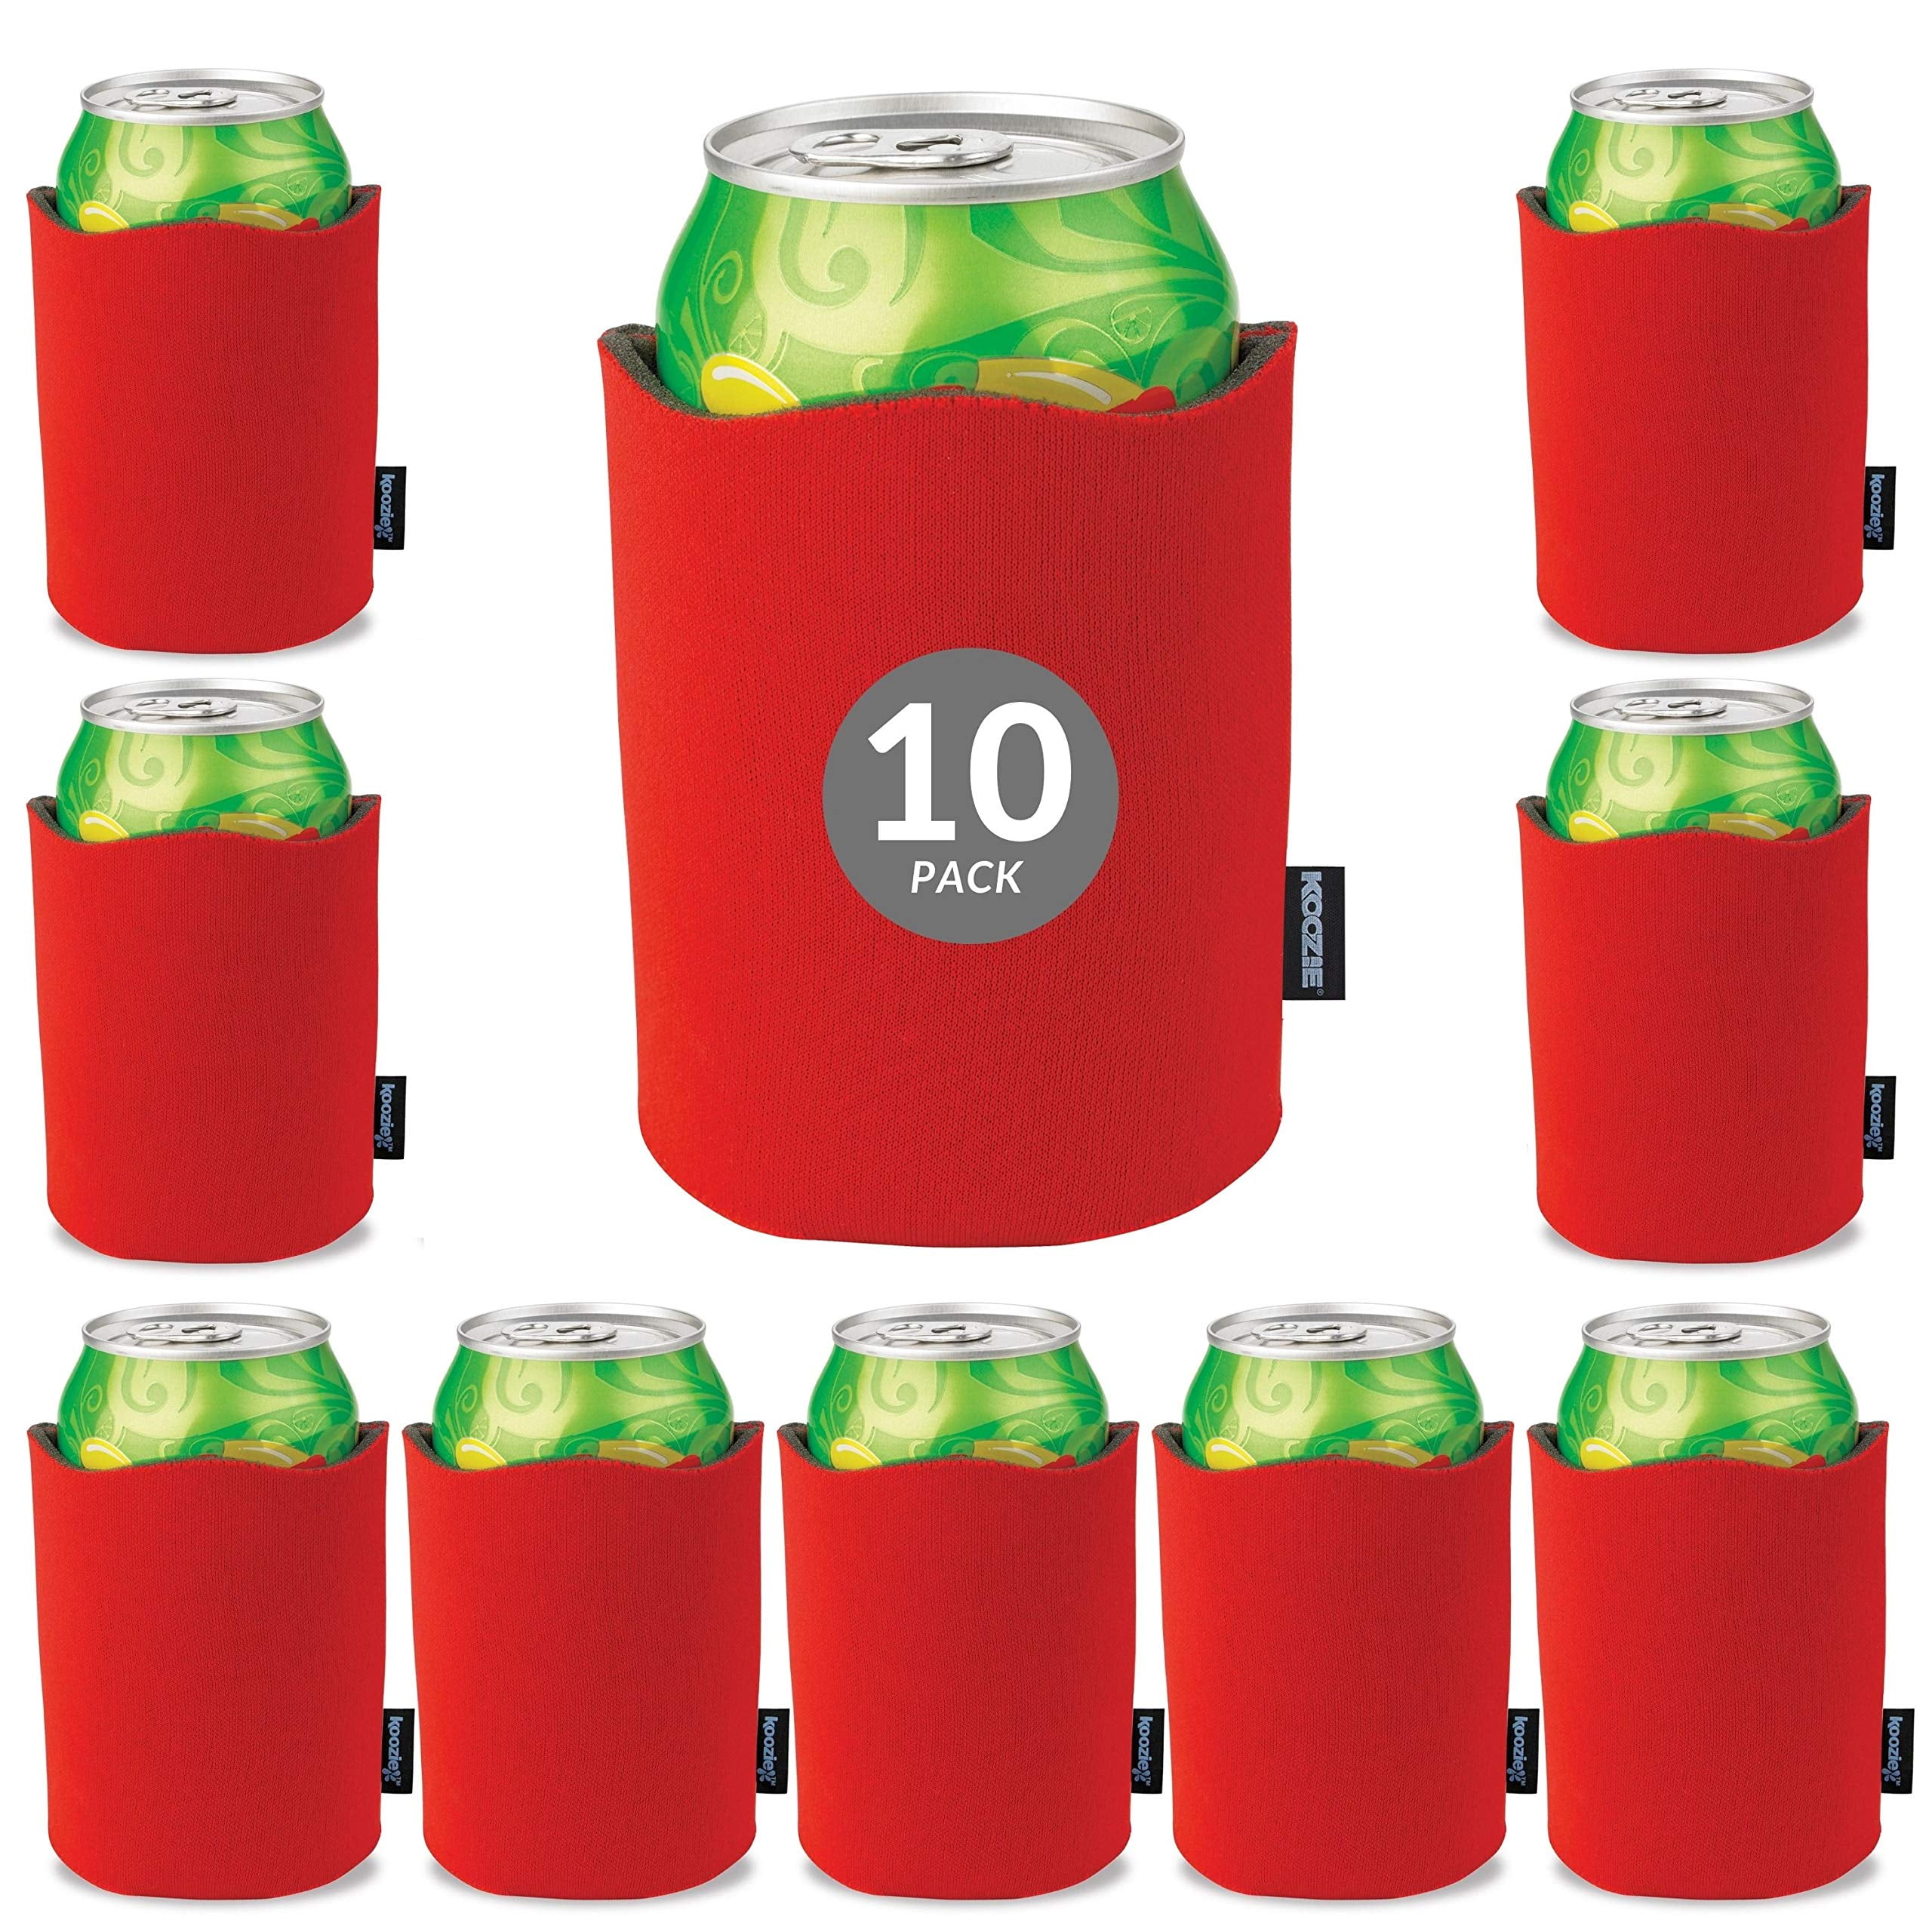 Koozie Fancy Edge Can Cooler 10 Pack Blank Beer Koozie For Cans And Bottles Bulk Insulated Beverage Holder Diy Personalized Gifts For Events Bachelorette Parties Weddings Birthdays Red Walmart Com